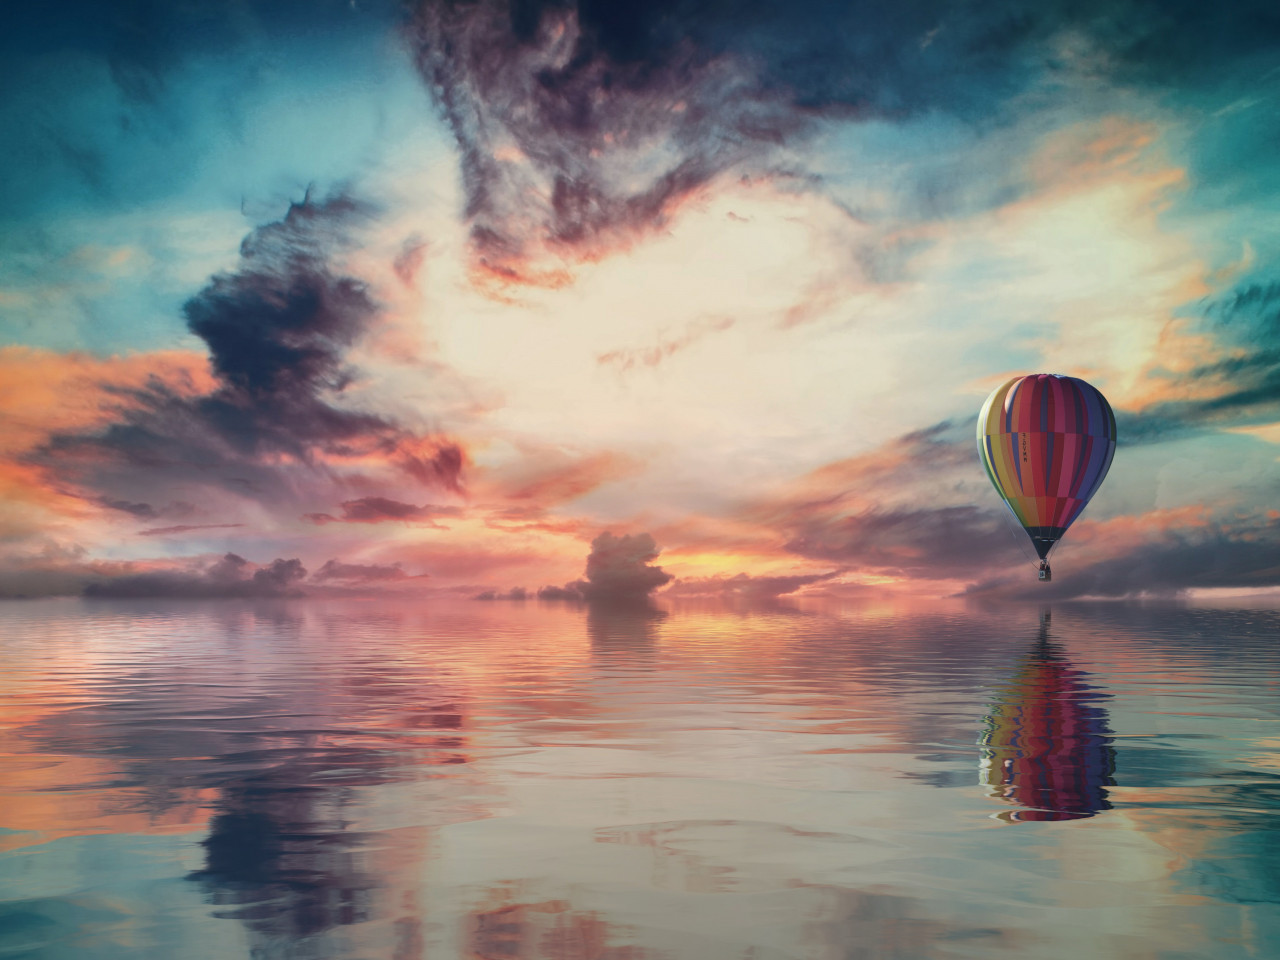 Fantasy travel with the hot air balloon wallpaper 1280x960